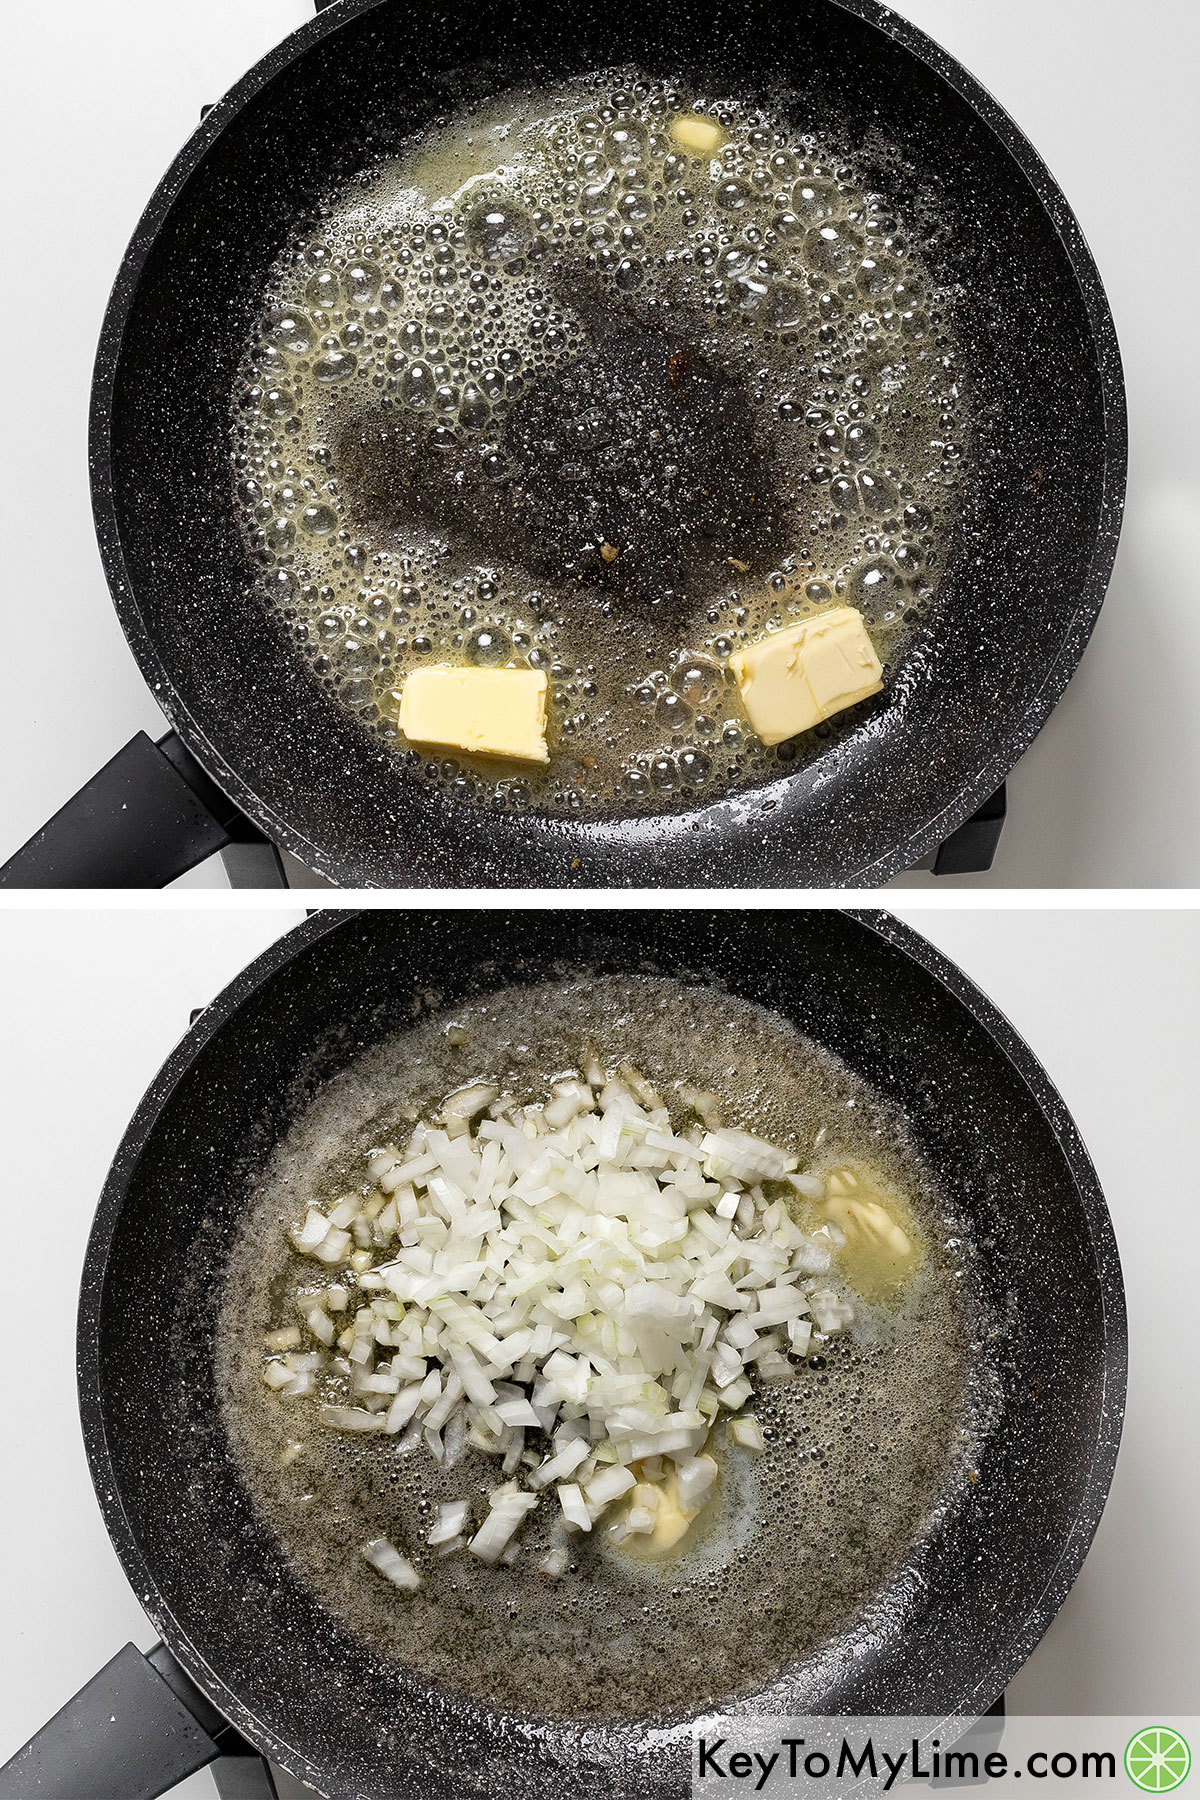 Melting butter into the remaining oil, and then adding and cooking onions until translucent.